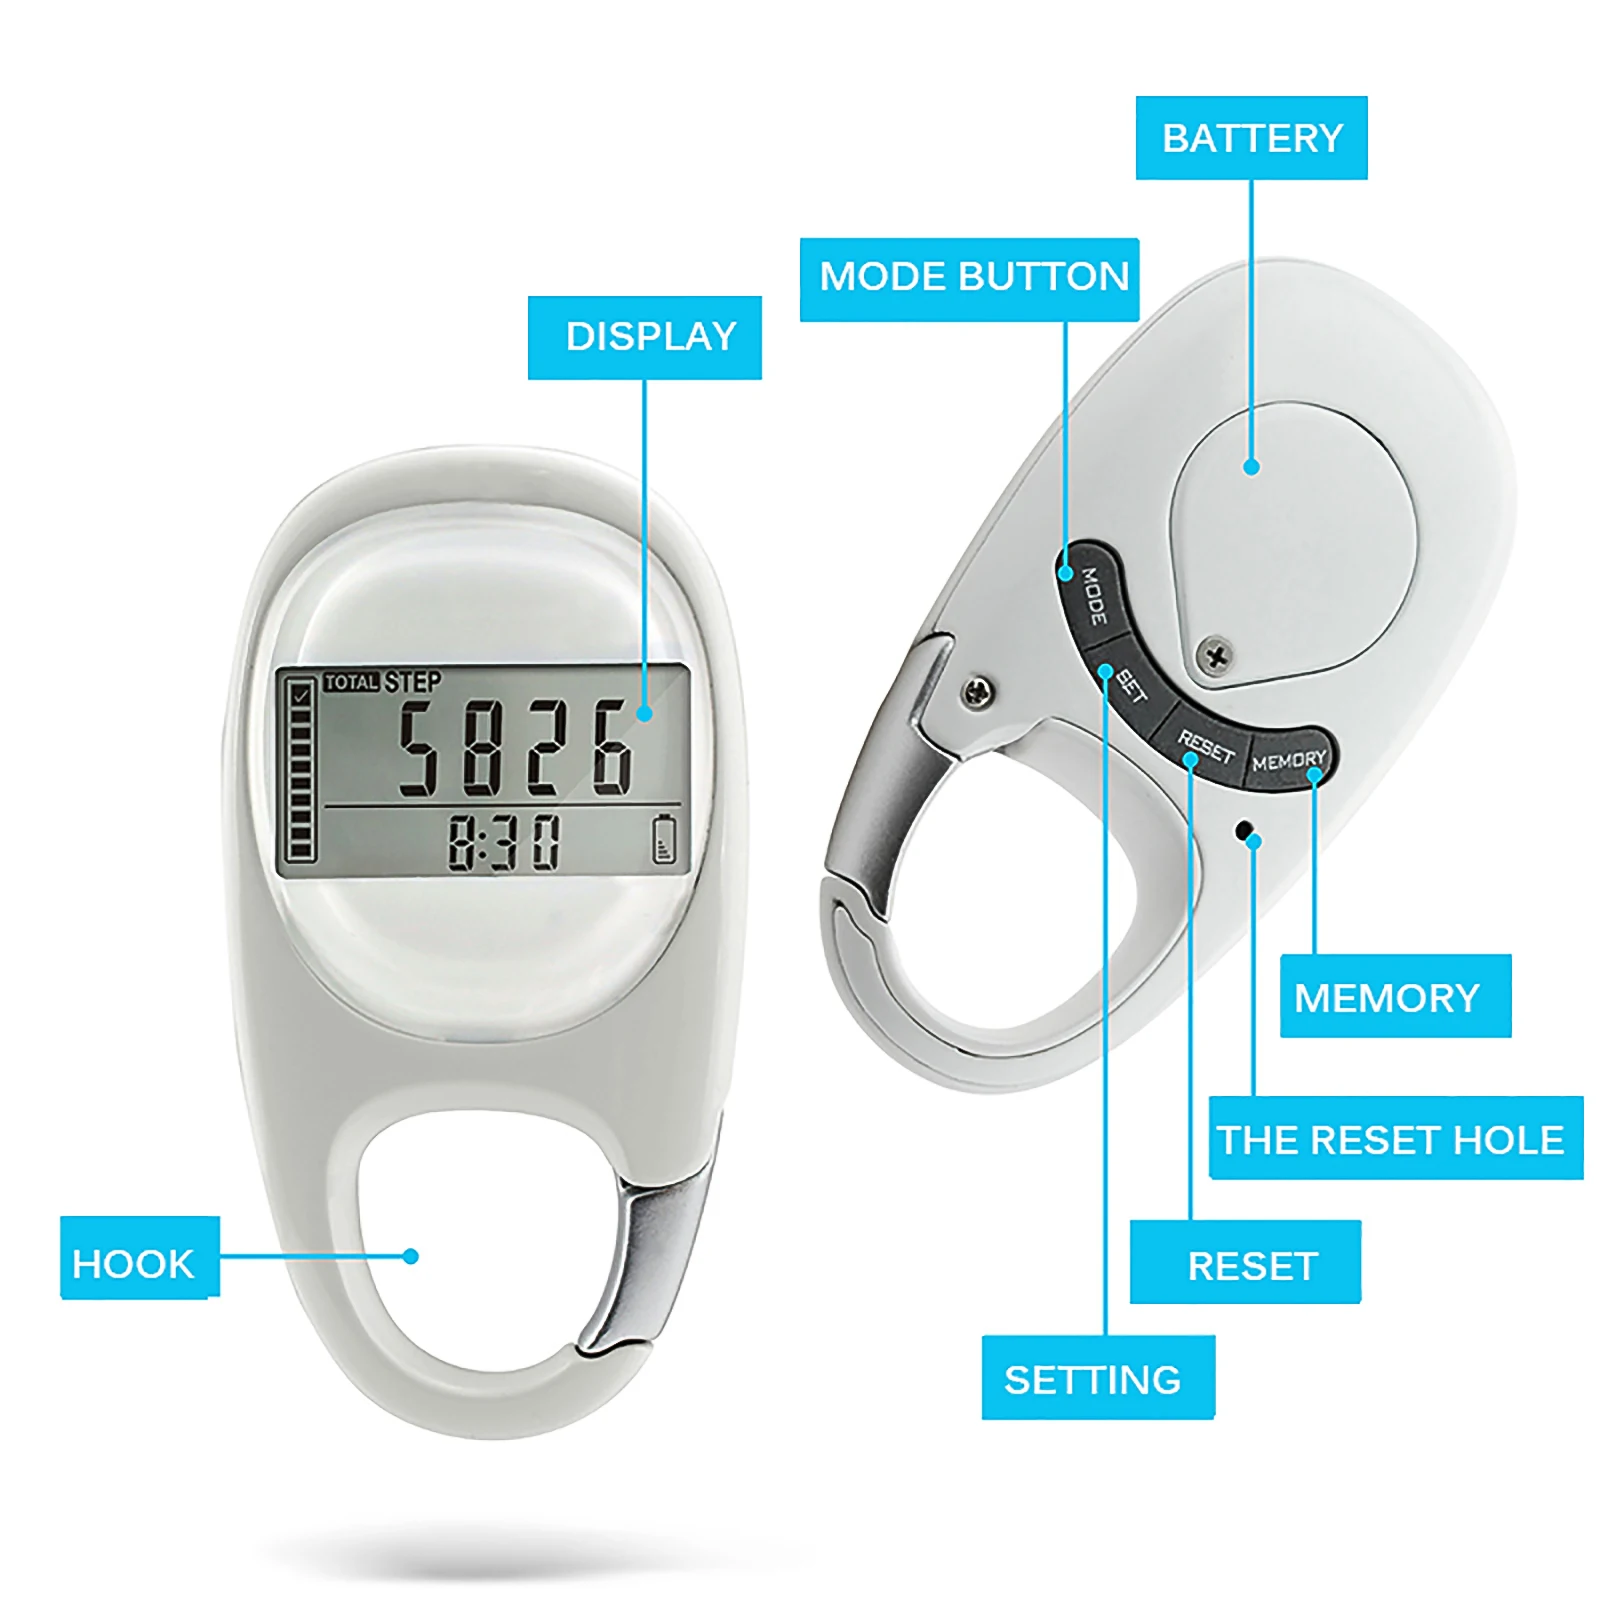 

Mini Simple Pedometer Walking Pedometer With Clip Accurately Track Steps Miles/Km Calories Burned Activity Time Step Counter